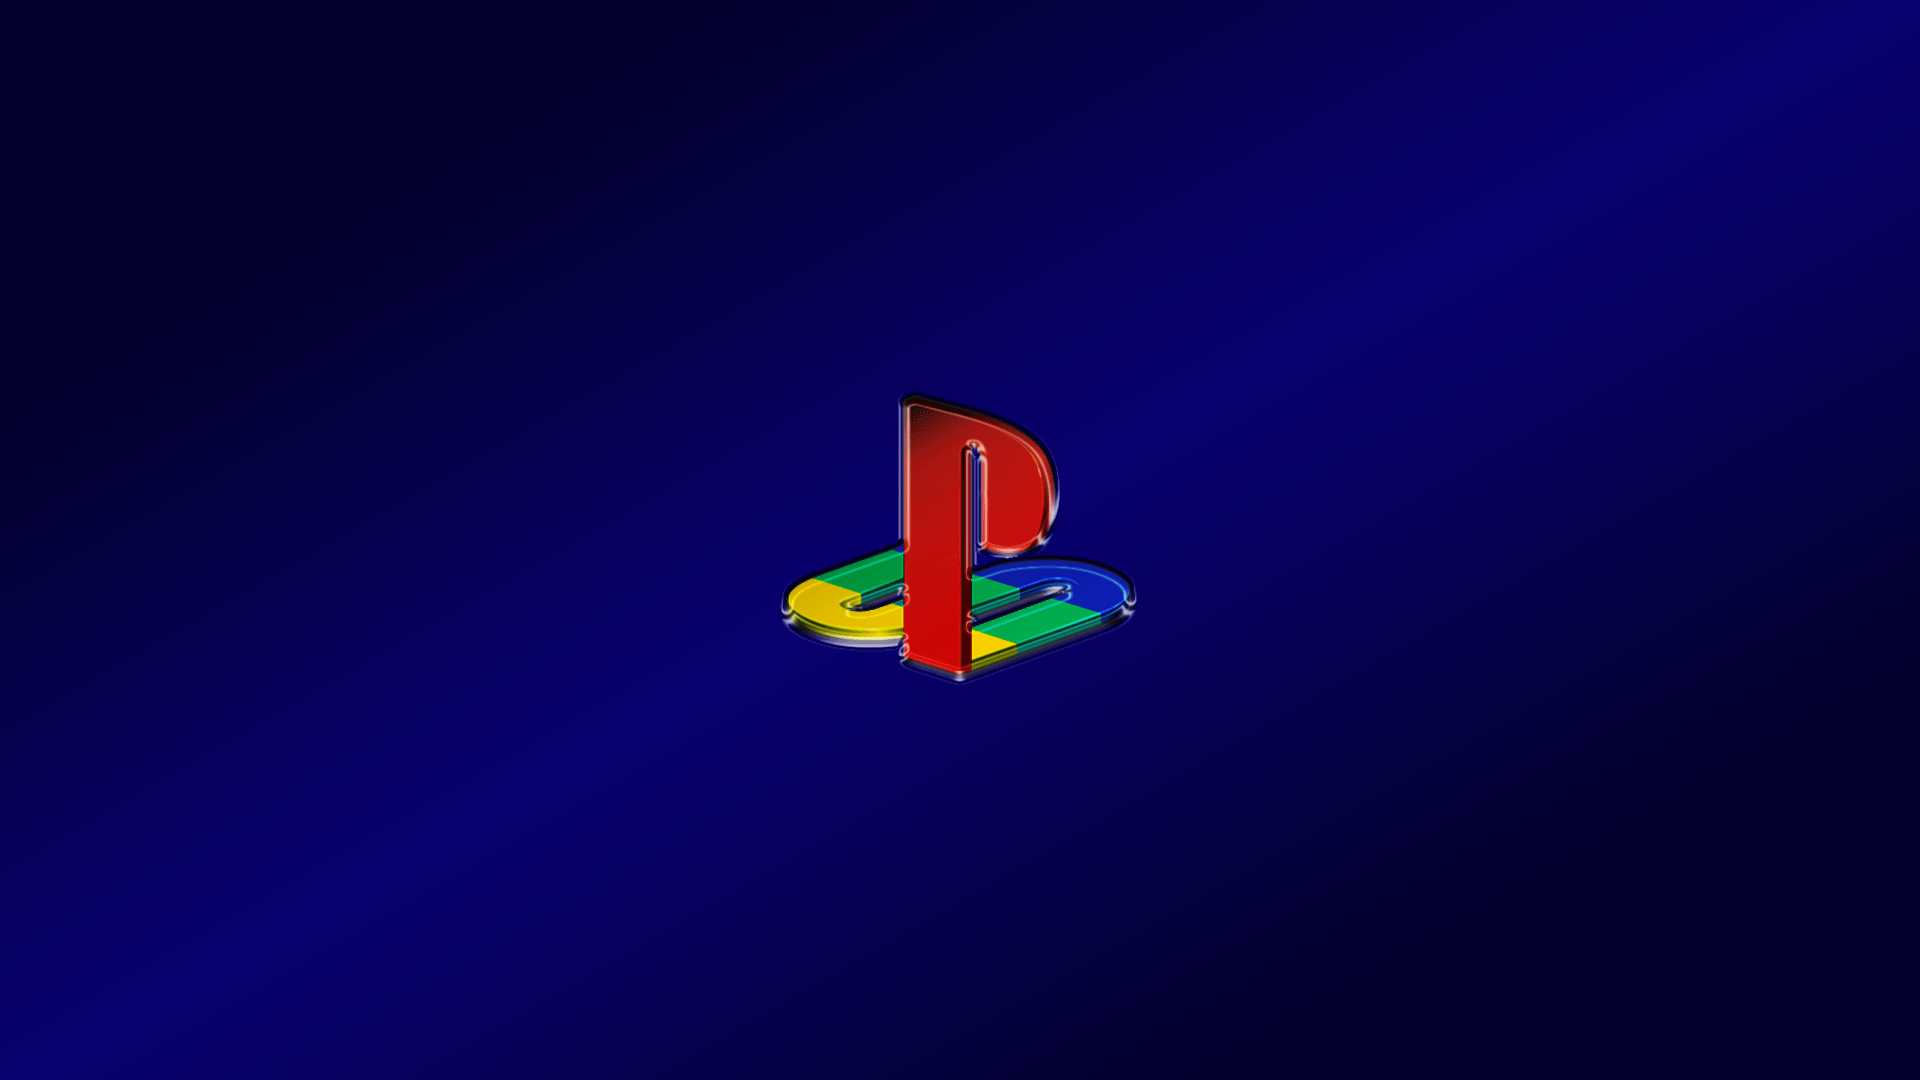 image Couldnt find a background with the PS logo based on the backdrop of  todays E3 showcase so I ended up making one myself using the blank  wallpaper from the PlayStation Website